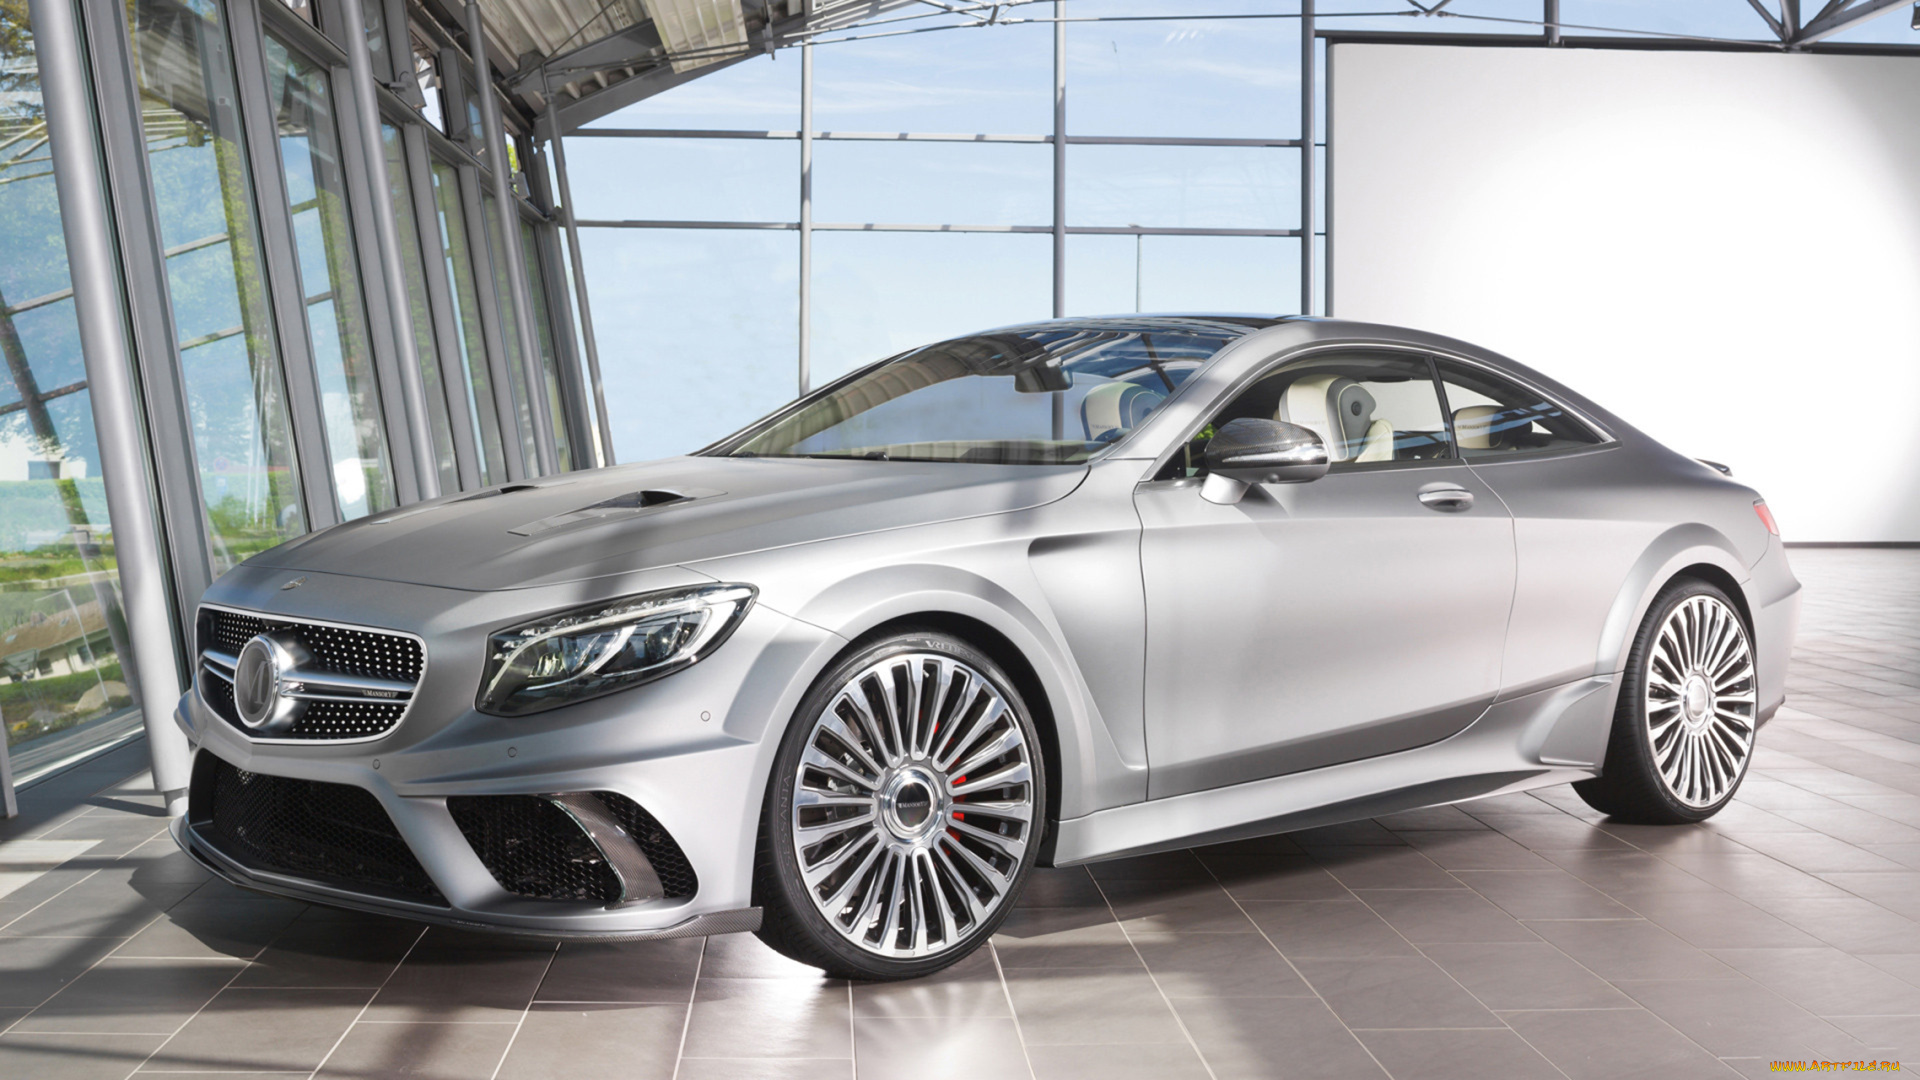 mansory, mercedes-benz, s63, amg, coupe, 2015, автомобили, mercedes-benz, mansory, s63, amg, coupe, 2015